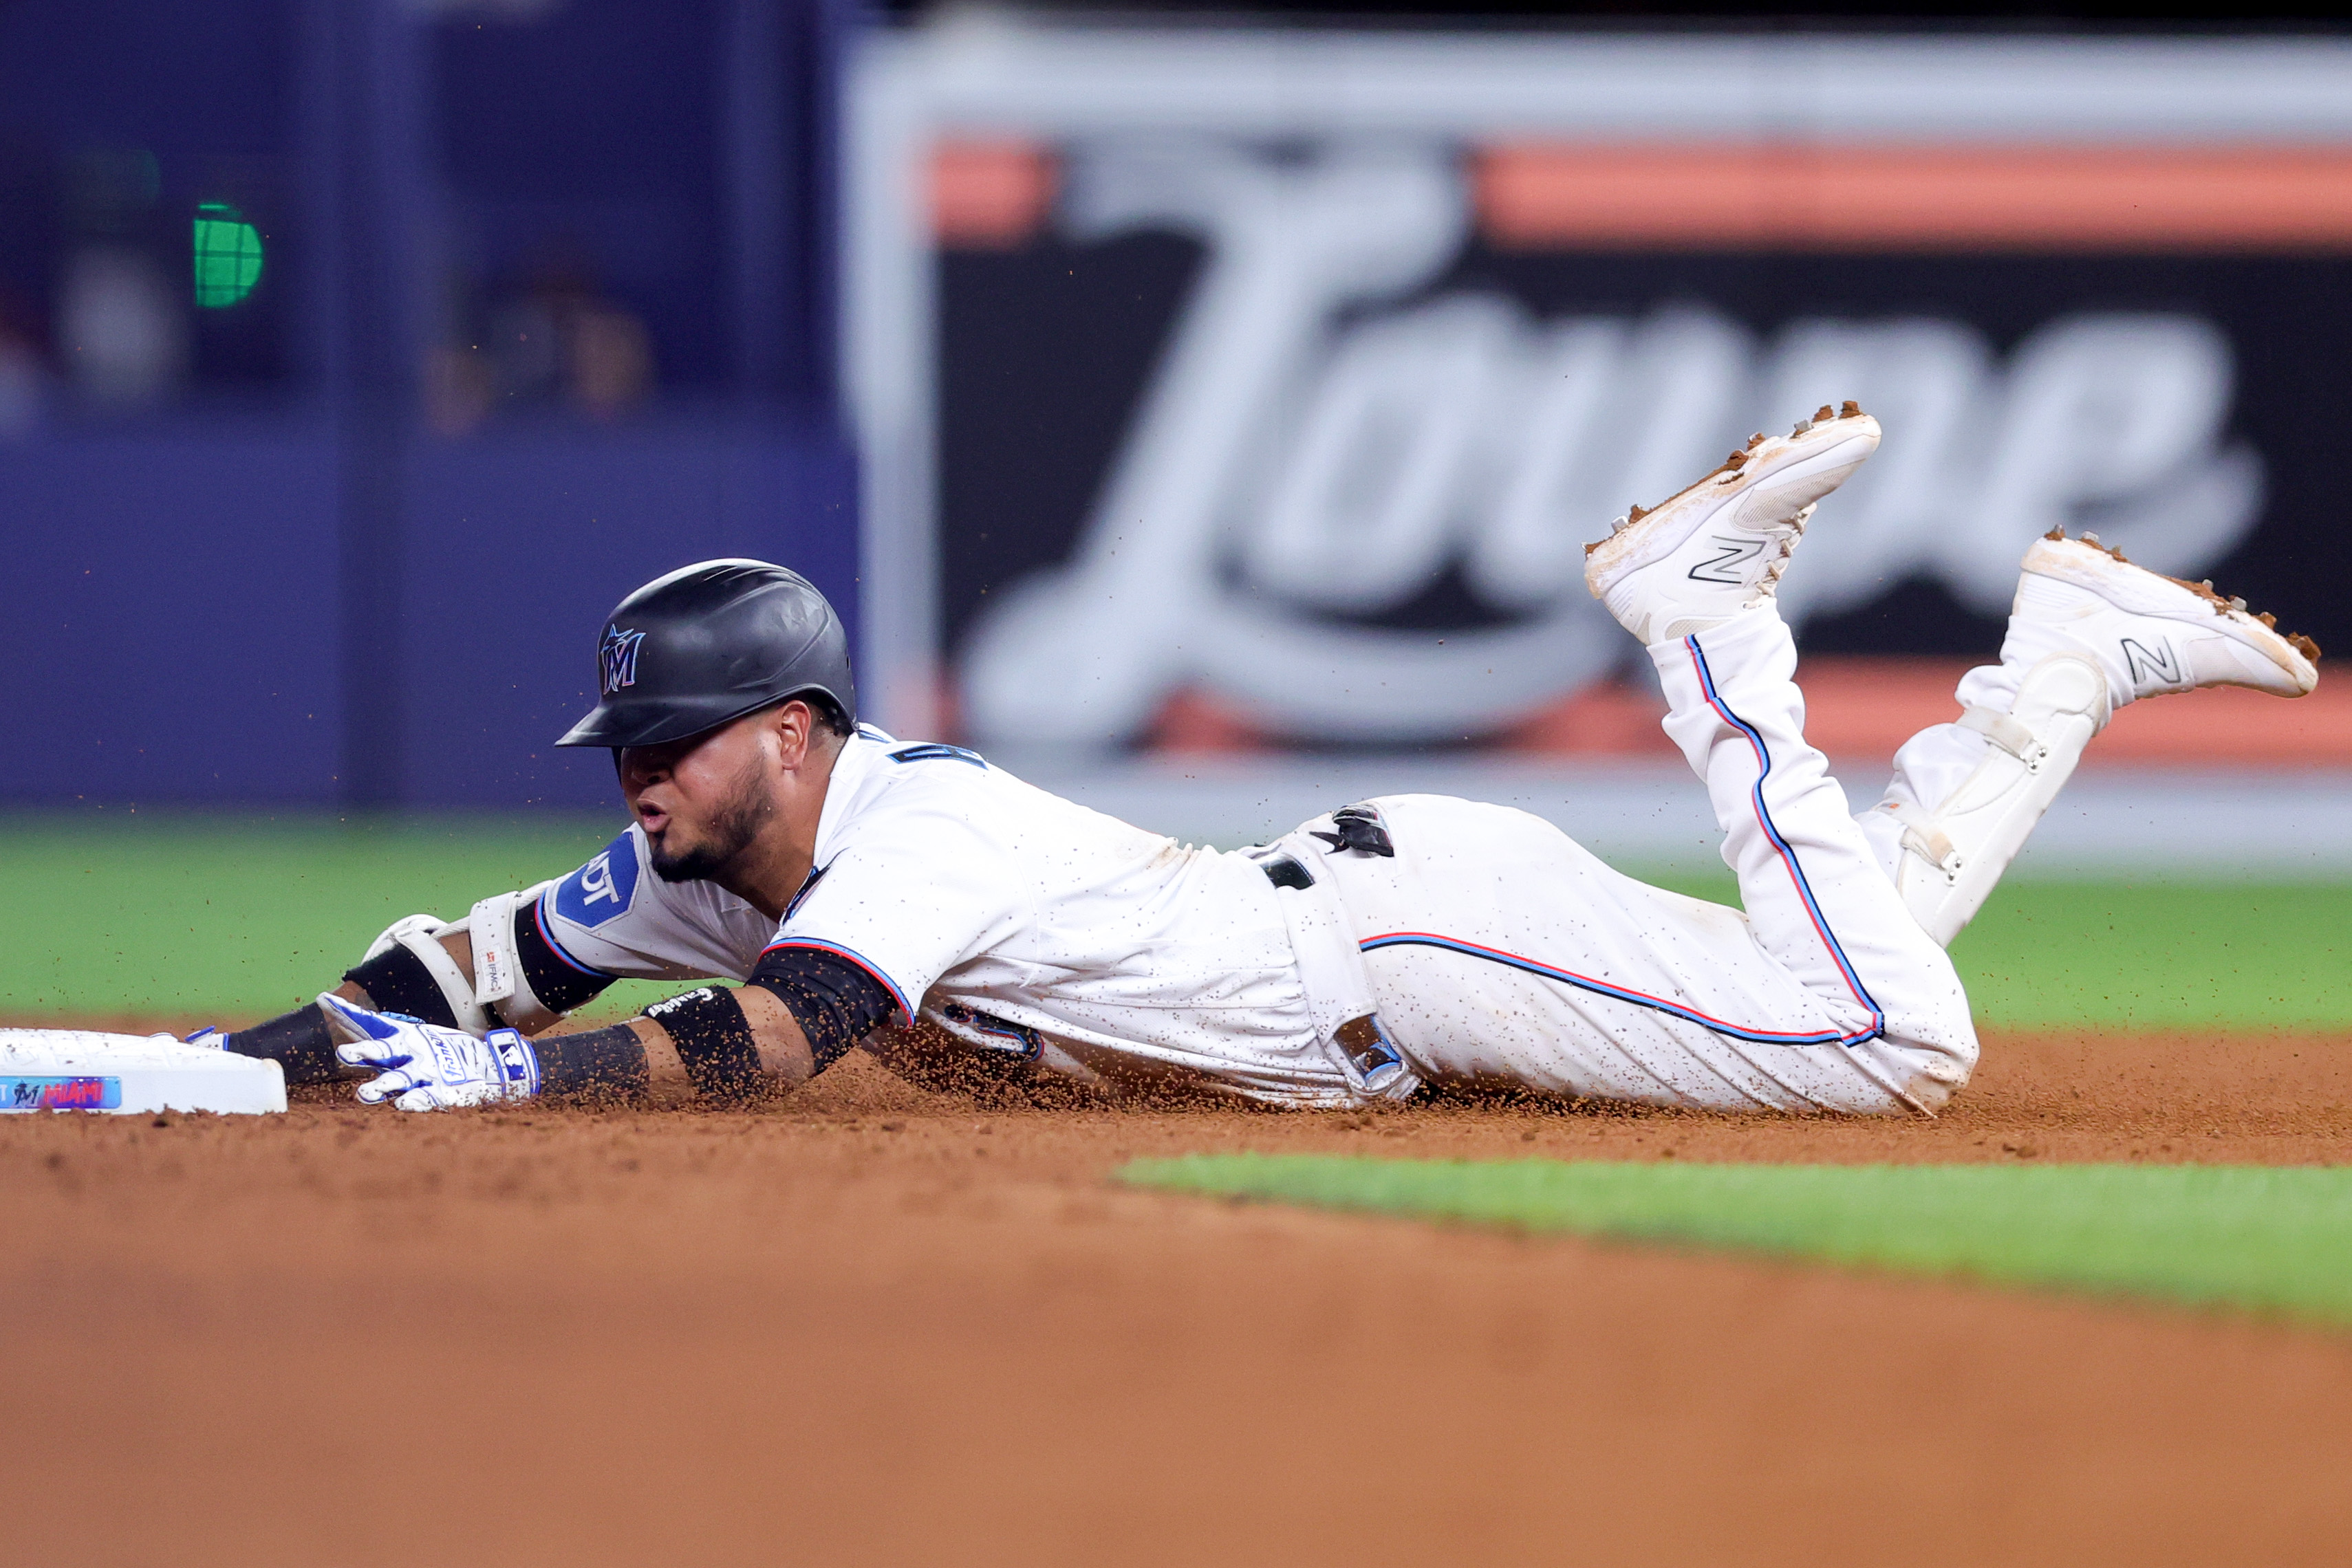 Luis Arraez #3 of the Miami Marlins slides to second base against the Washington Nationals during the eighth inning at loanDepot park on May 17, 2023 in Miami, Florida.